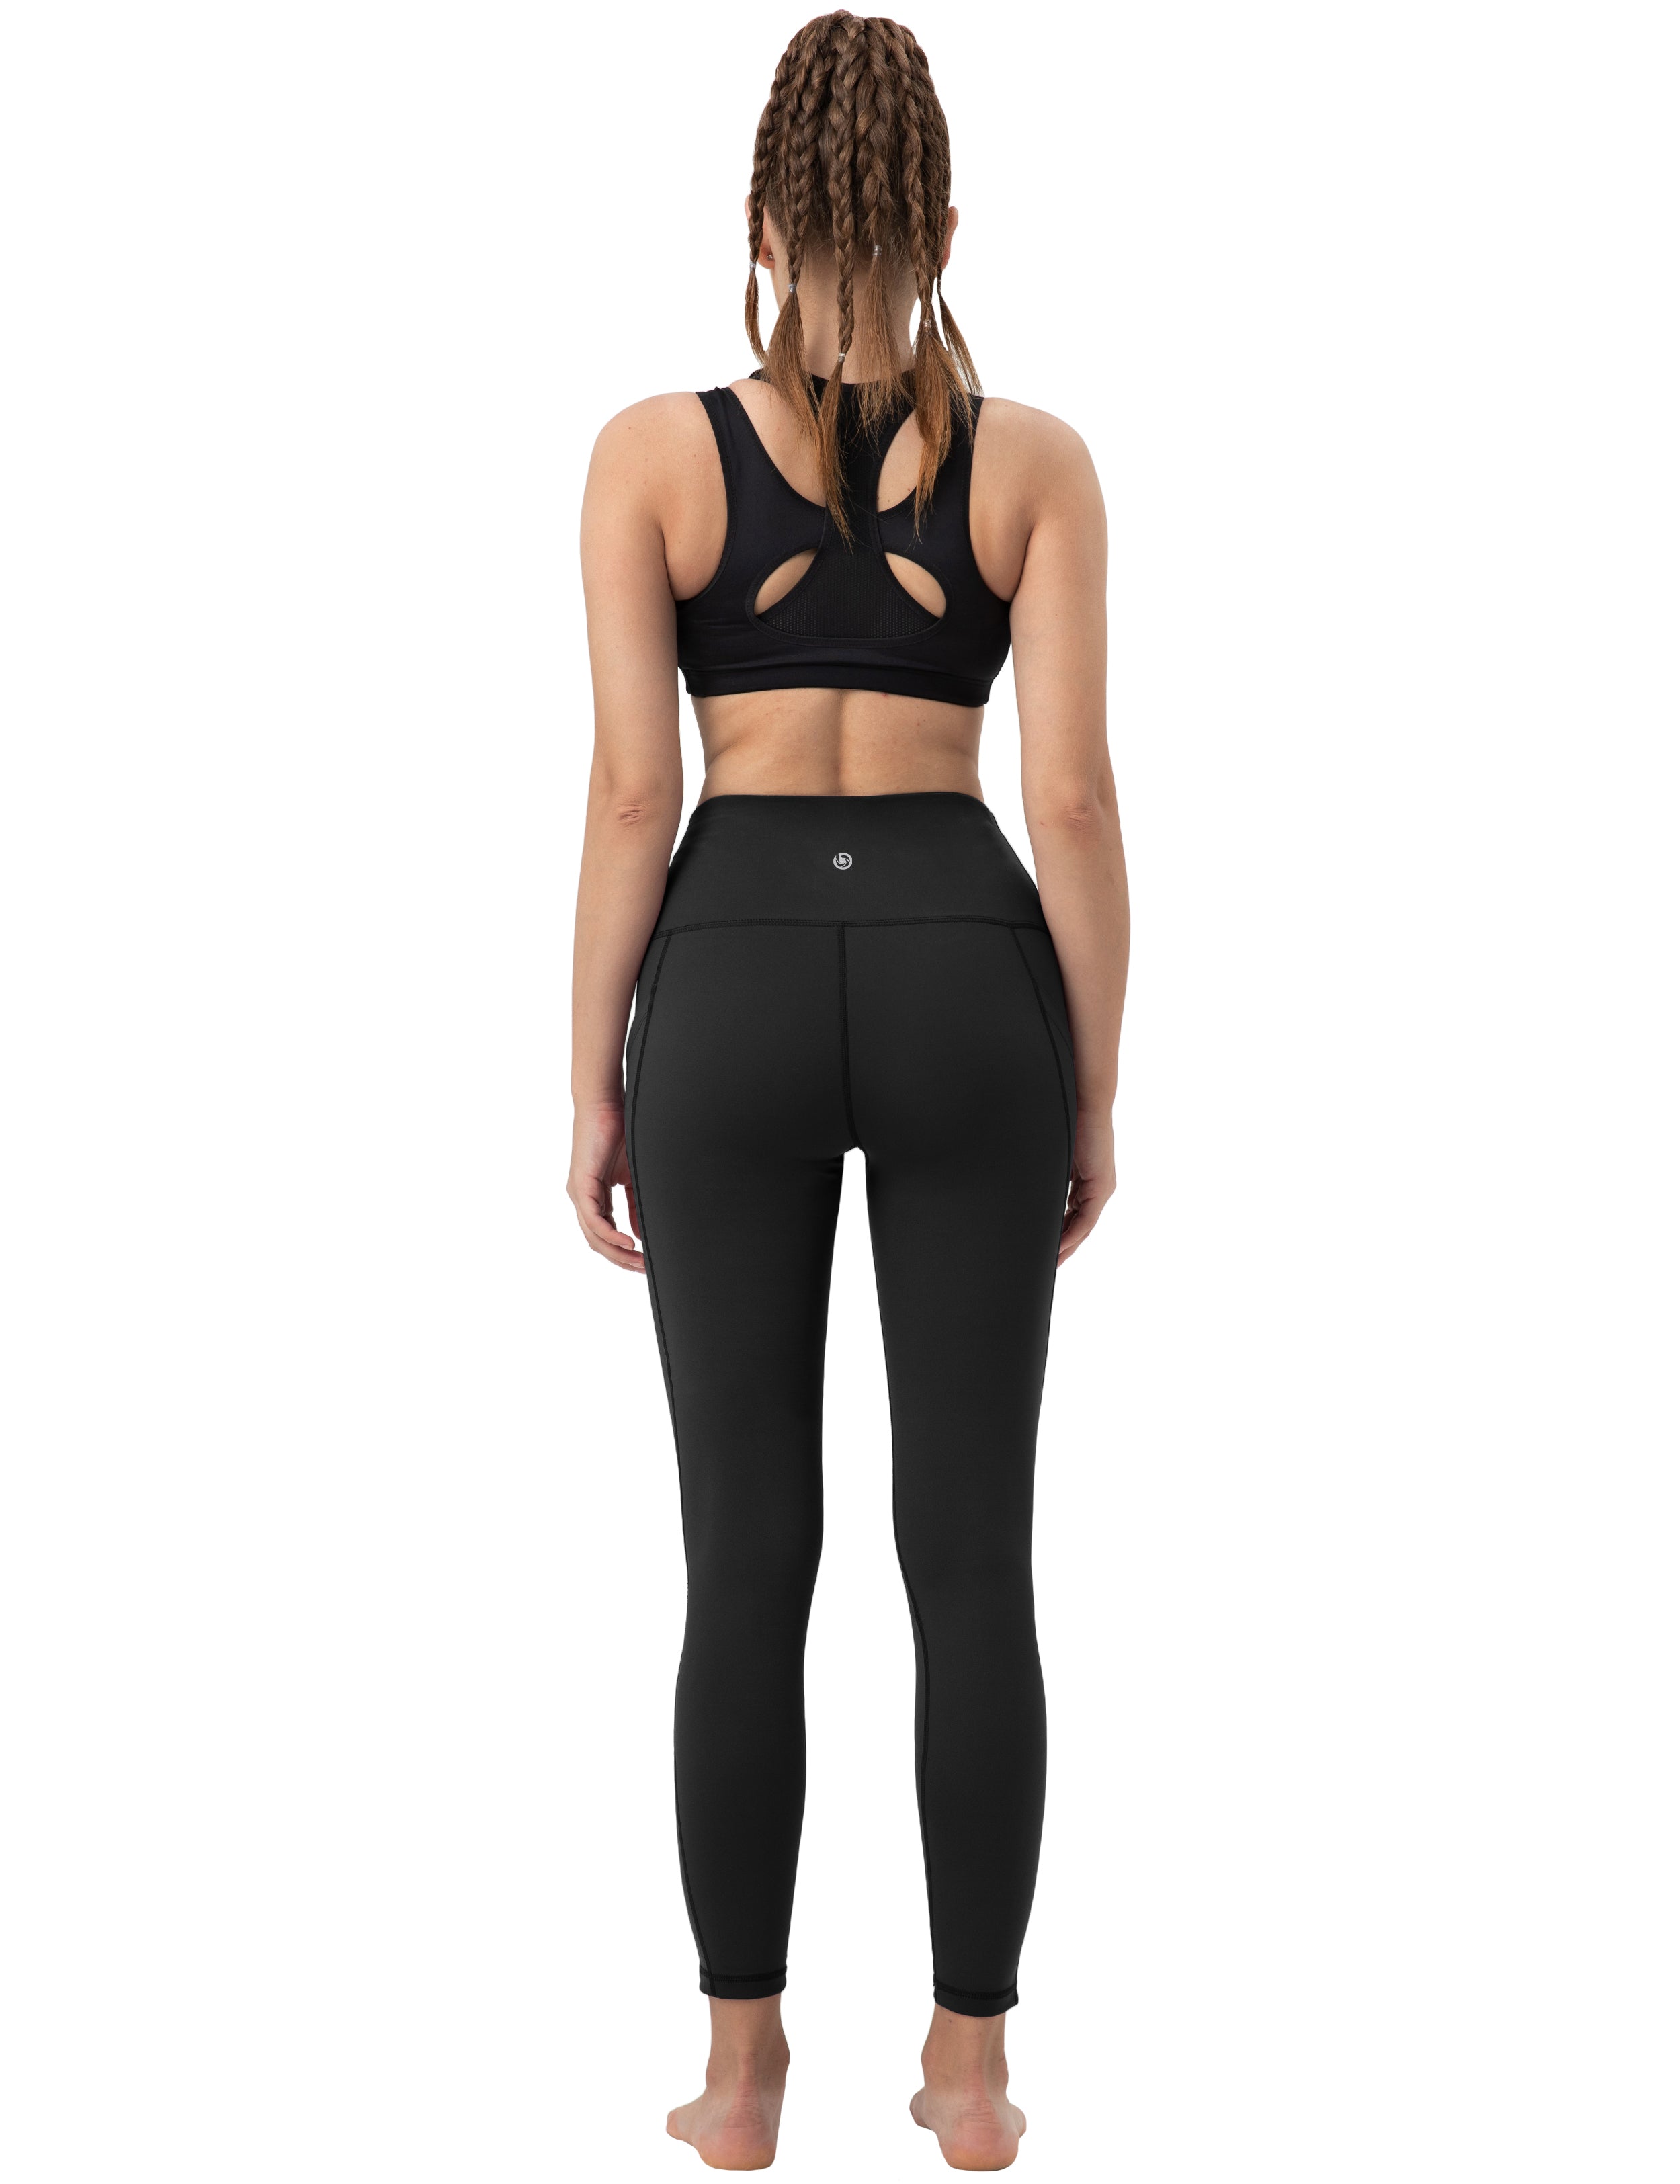 High Waist Side Pockets Biking Pants black 75% Nylon, 25% Spandex Fabric doesn't attract lint easily 4-way stretch No see-through Moisture-wicking Tummy control Inner pocket